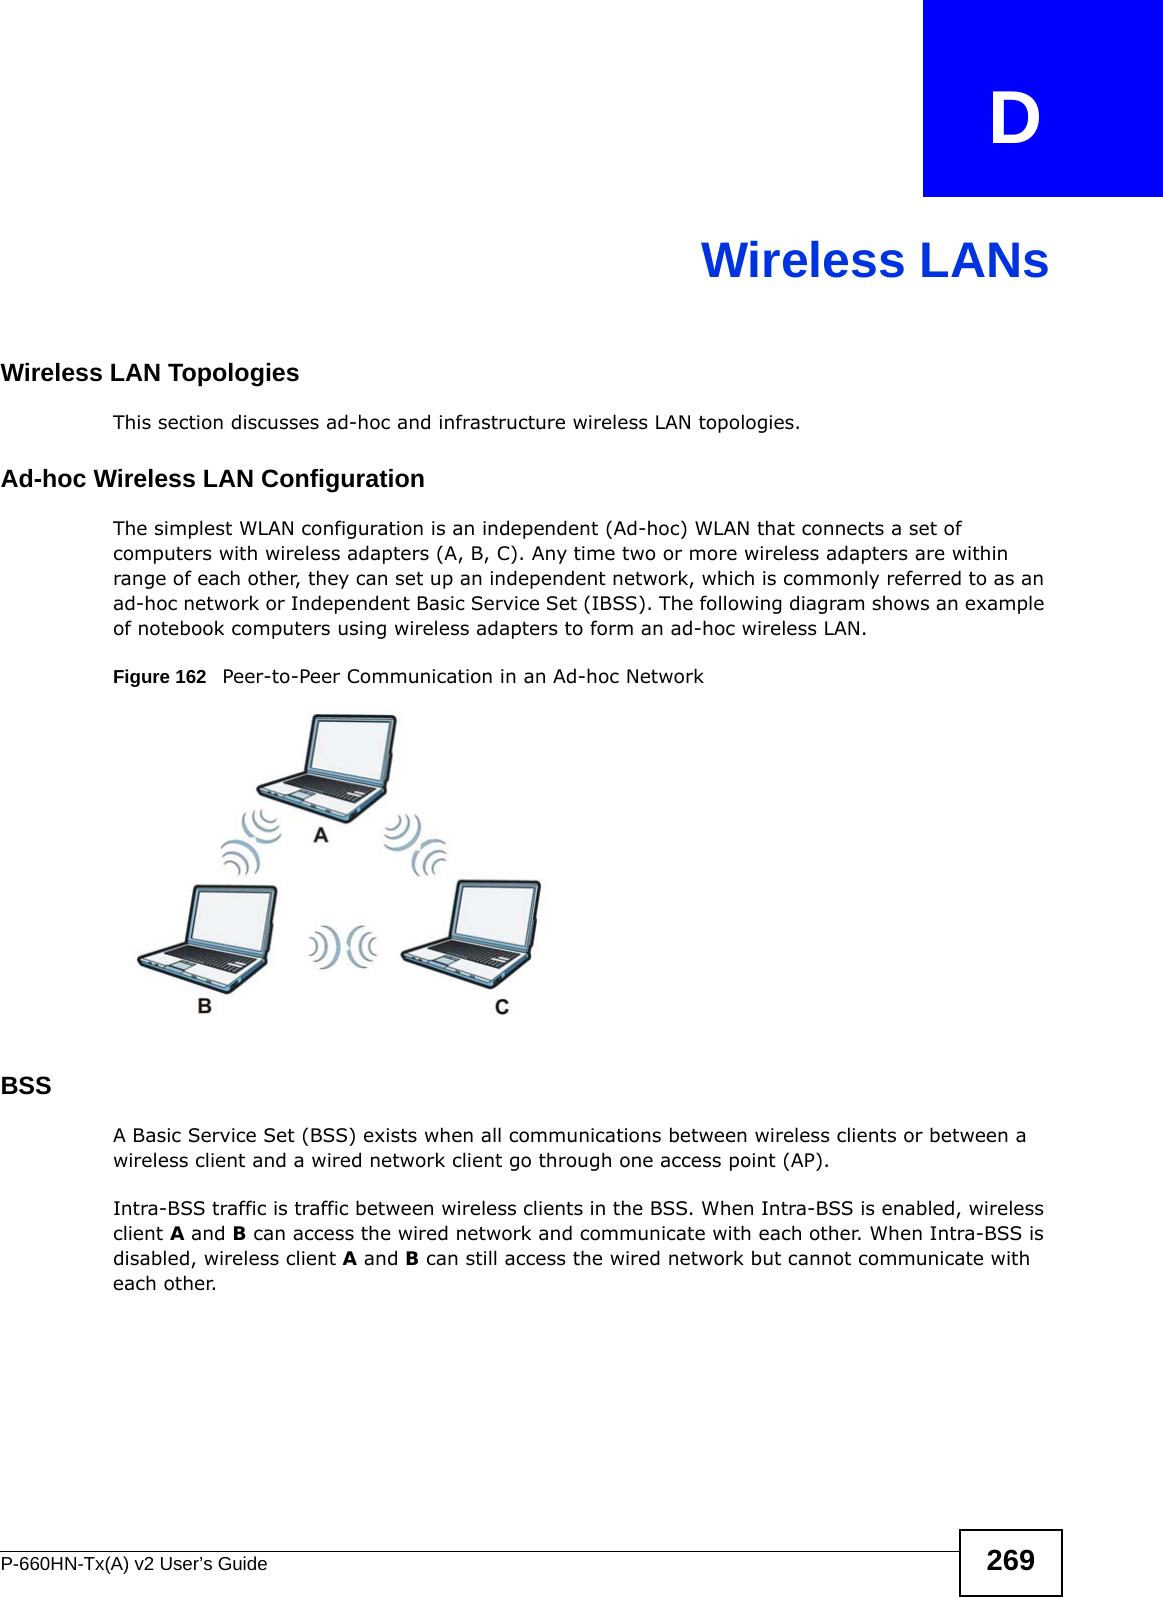 P-660HN-Tx(A) v2 User’s Guide 269APPENDIX   DWireless LANsWireless LAN TopologiesThis section discusses ad-hoc and infrastructure wireless LAN topologies.Ad-hoc Wireless LAN ConfigurationThe simplest WLAN configuration is an independent (Ad-hoc) WLAN that connects a set of computers with wireless adapters (A, B, C). Any time two or more wireless adapters are within range of each other, they can set up an independent network, which is commonly referred to as an ad-hoc network or Independent Basic Service Set (IBSS). The following diagram shows an example of notebook computers using wireless adapters to form an ad-hoc wireless LAN. Figure 162   Peer-to-Peer Communication in an Ad-hoc NetworkBSSA Basic Service Set (BSS) exists when all communications between wireless clients or between a wireless client and a wired network client go through one access point (AP). Intra-BSS traffic is traffic between wireless clients in the BSS. When Intra-BSS is enabled, wireless client A and B can access the wired network and communicate with each other. When Intra-BSS is disabled, wireless client A and B can still access the wired network but cannot communicate with each other.